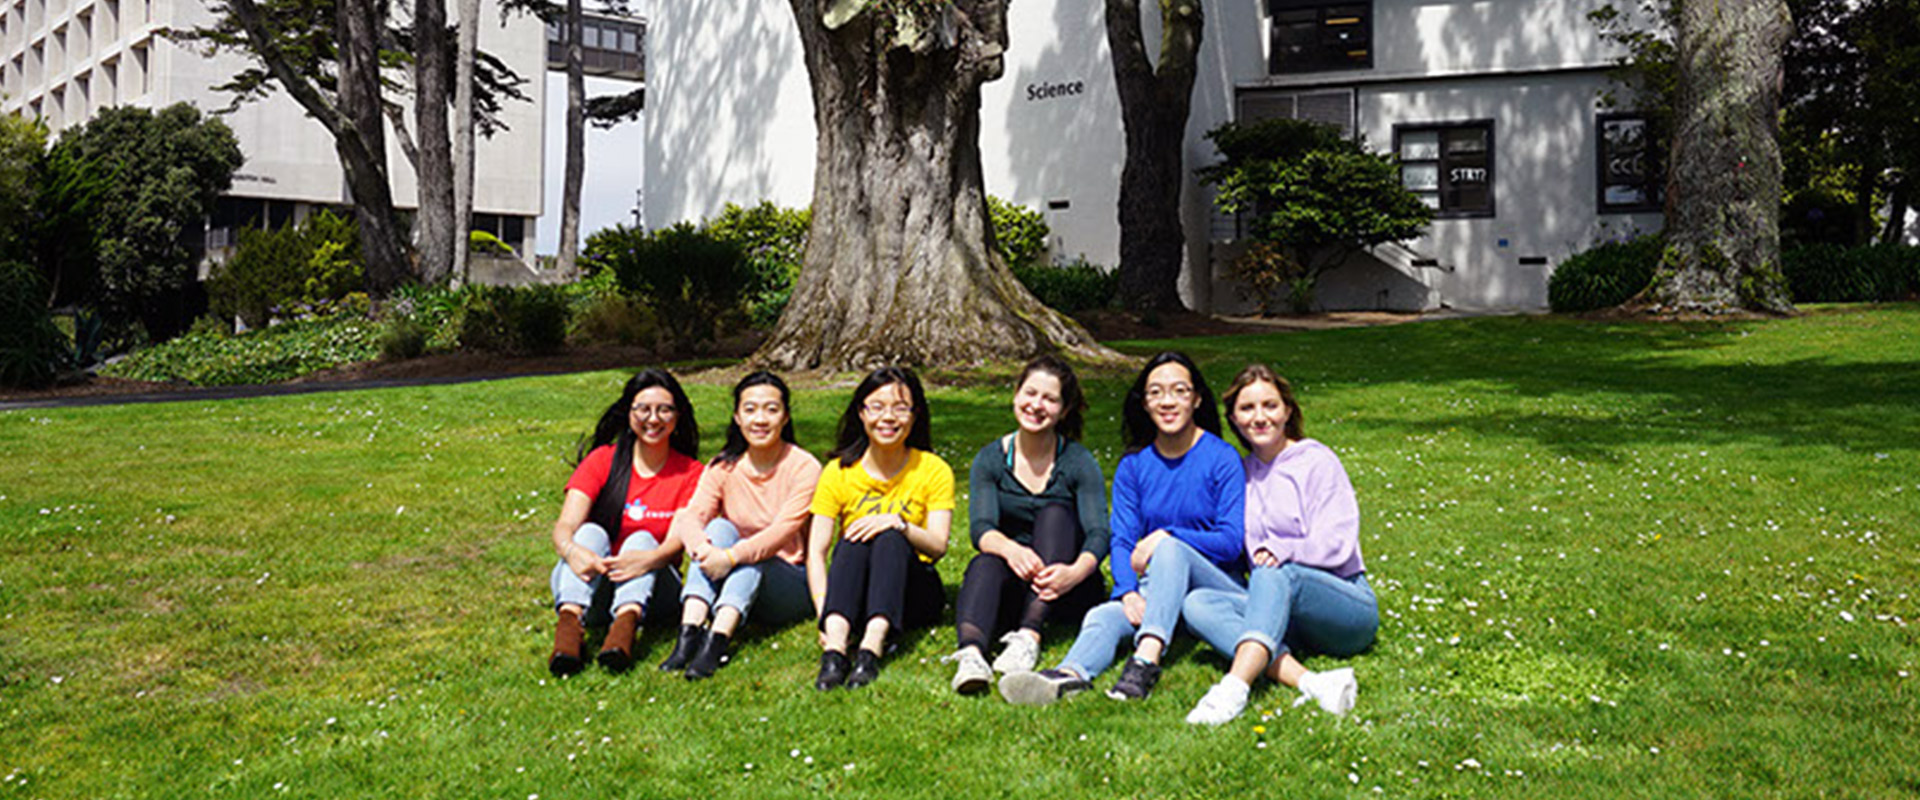 American Language Institute students at SF State sit under a tree on the grass